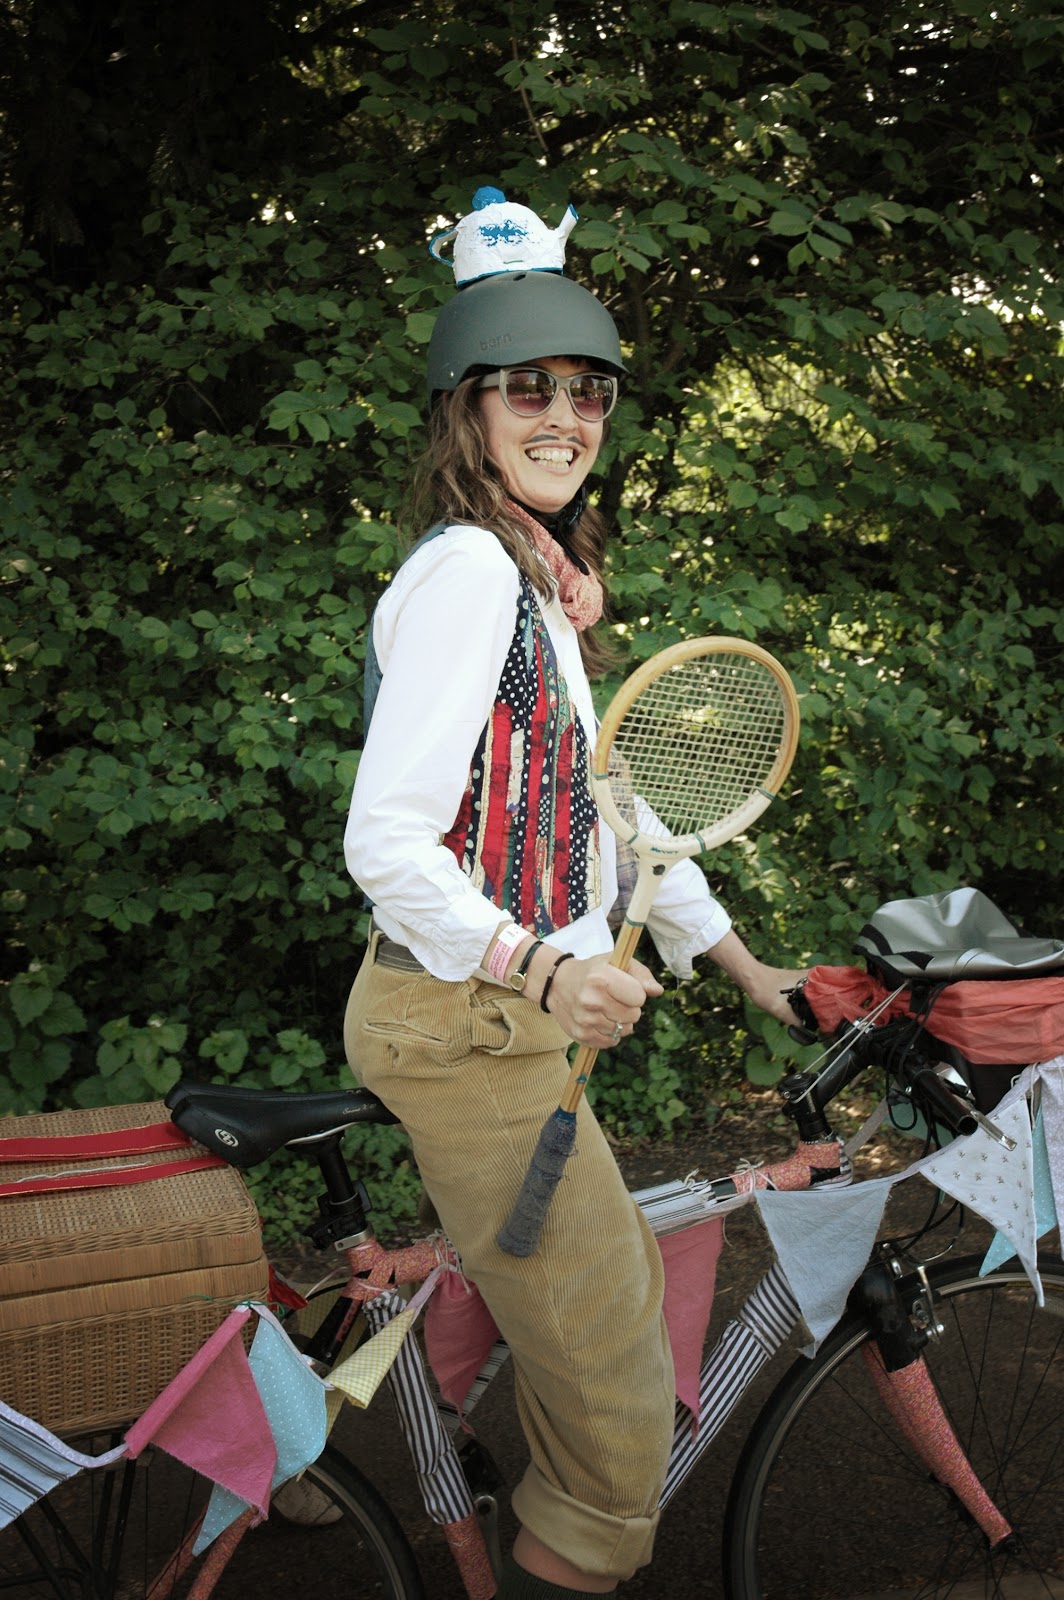 Bristol Vintage Velo - Need for Tweed: Who, What, When?